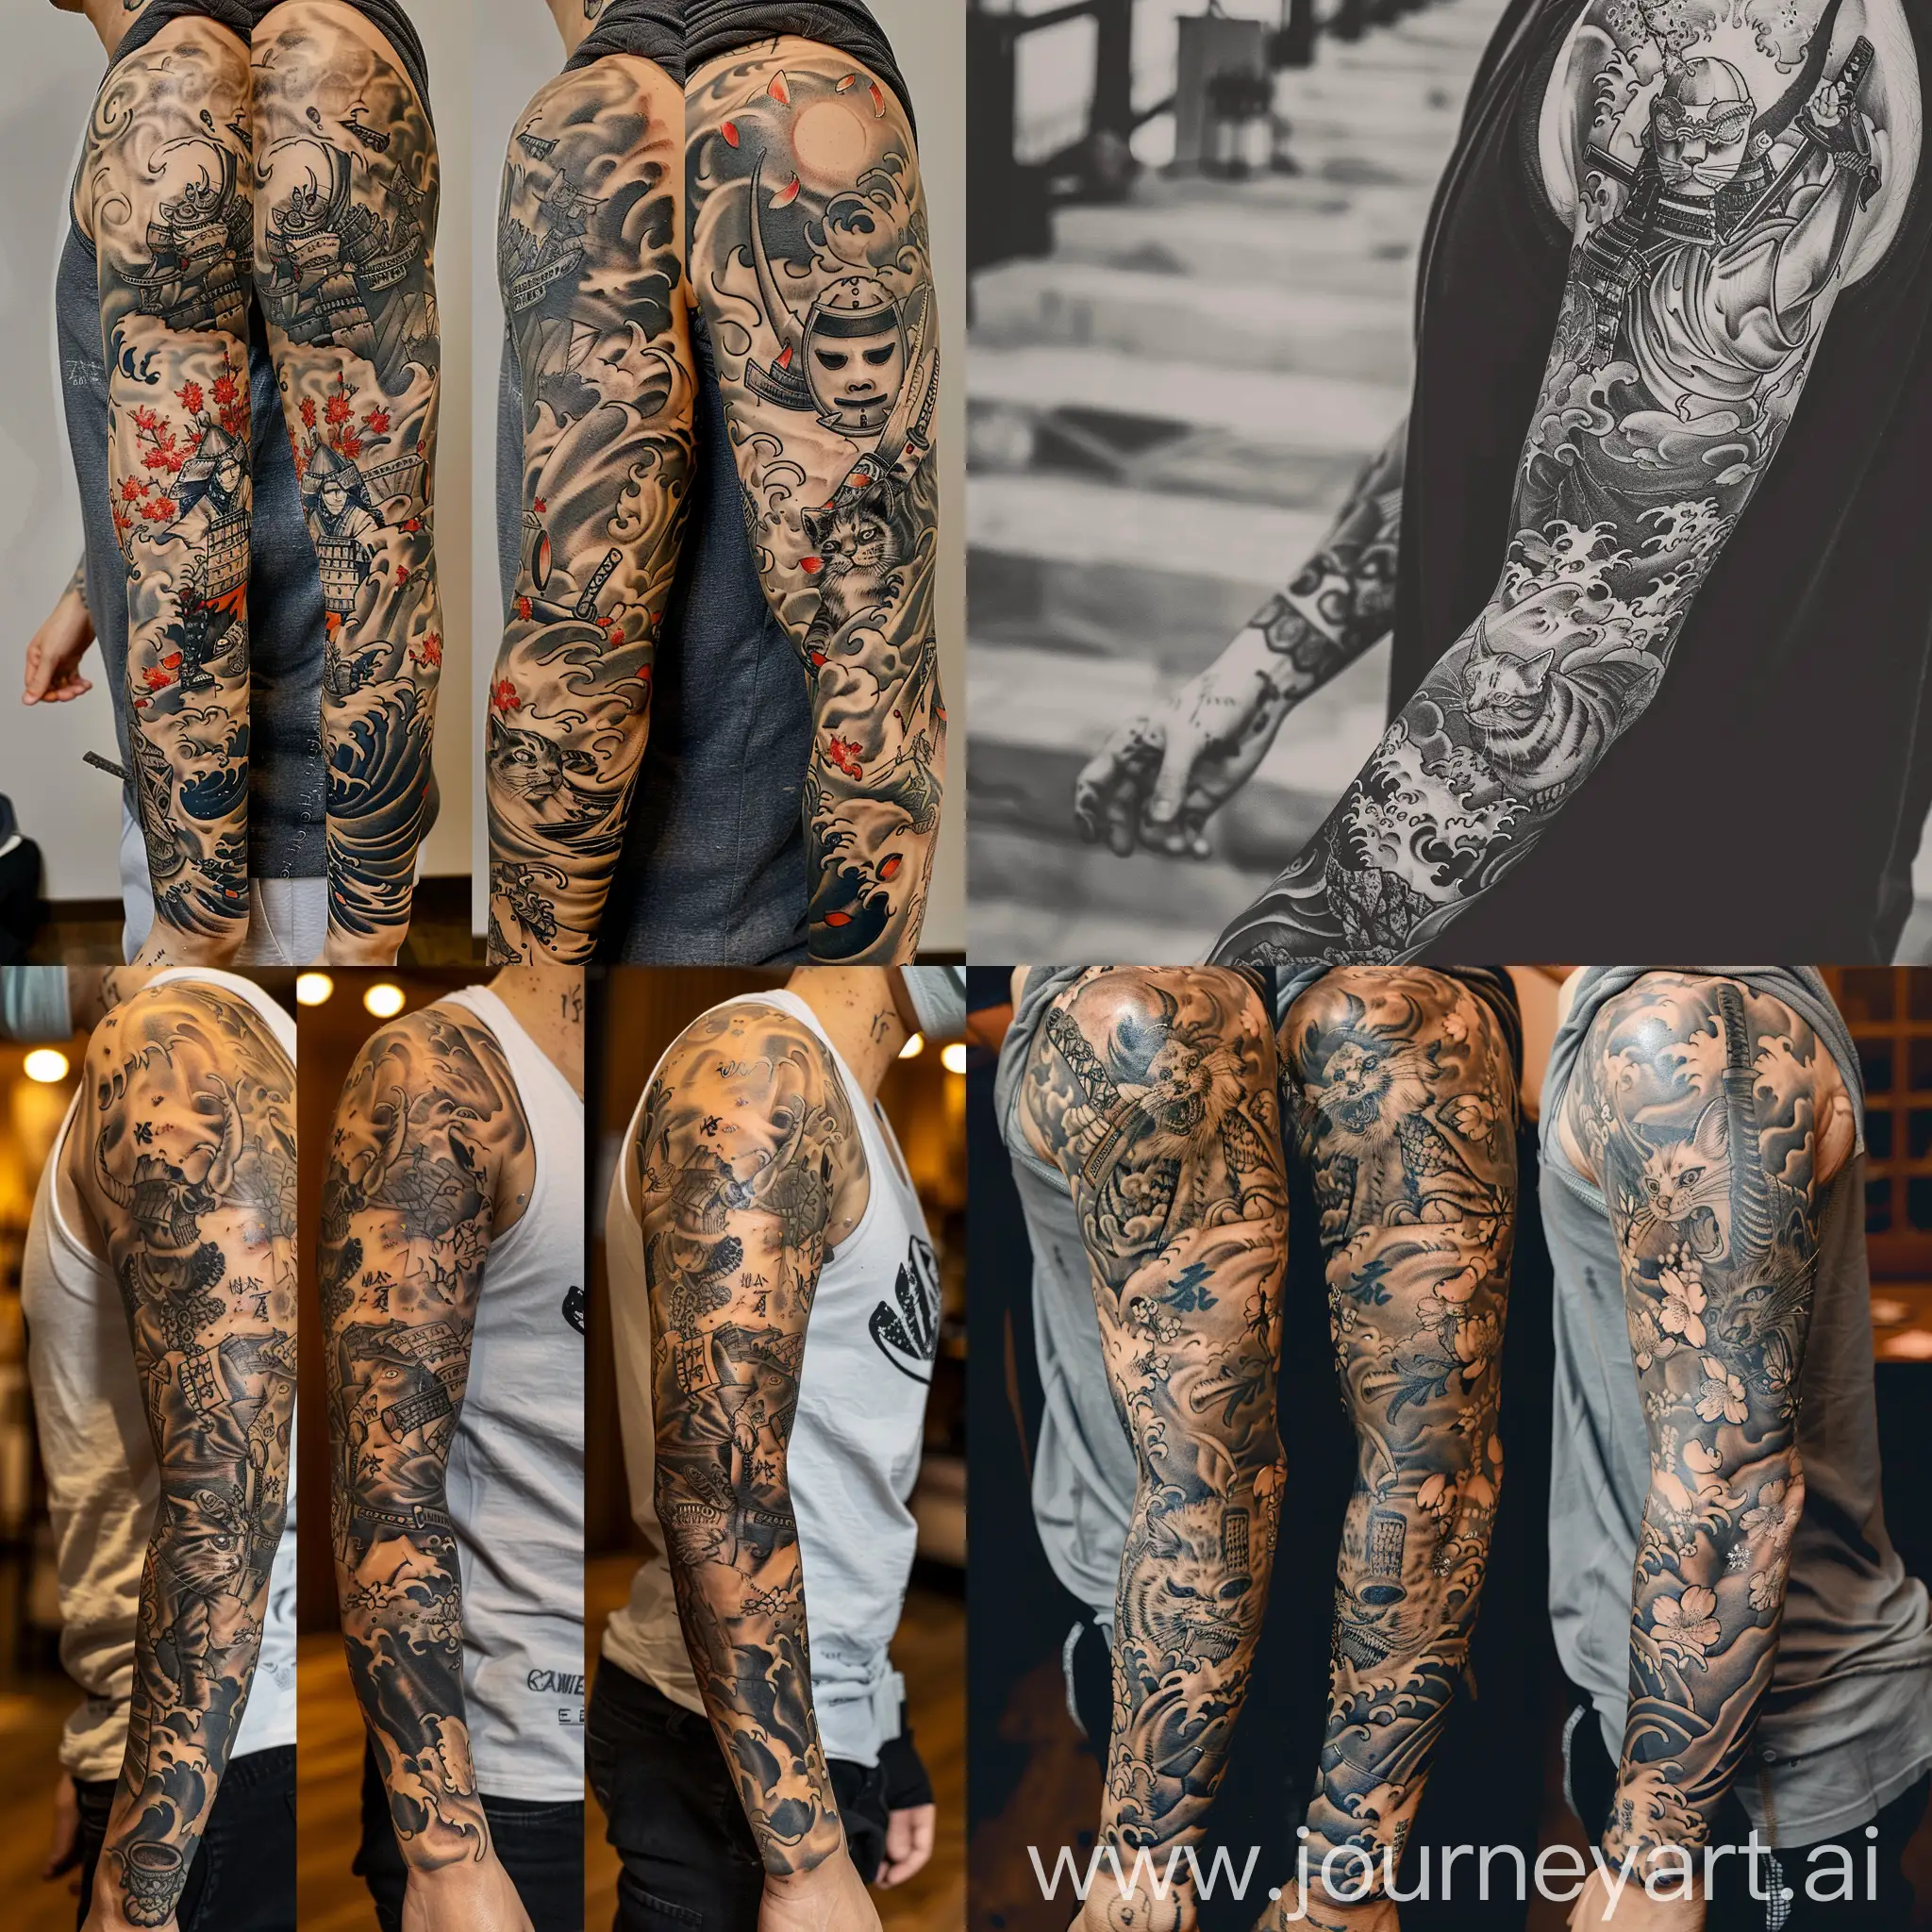 full sleeve tattoo in old japanese style with a samurai, oni and a cat with ninja kamui mask on, waves, a bit of cherry blossoms